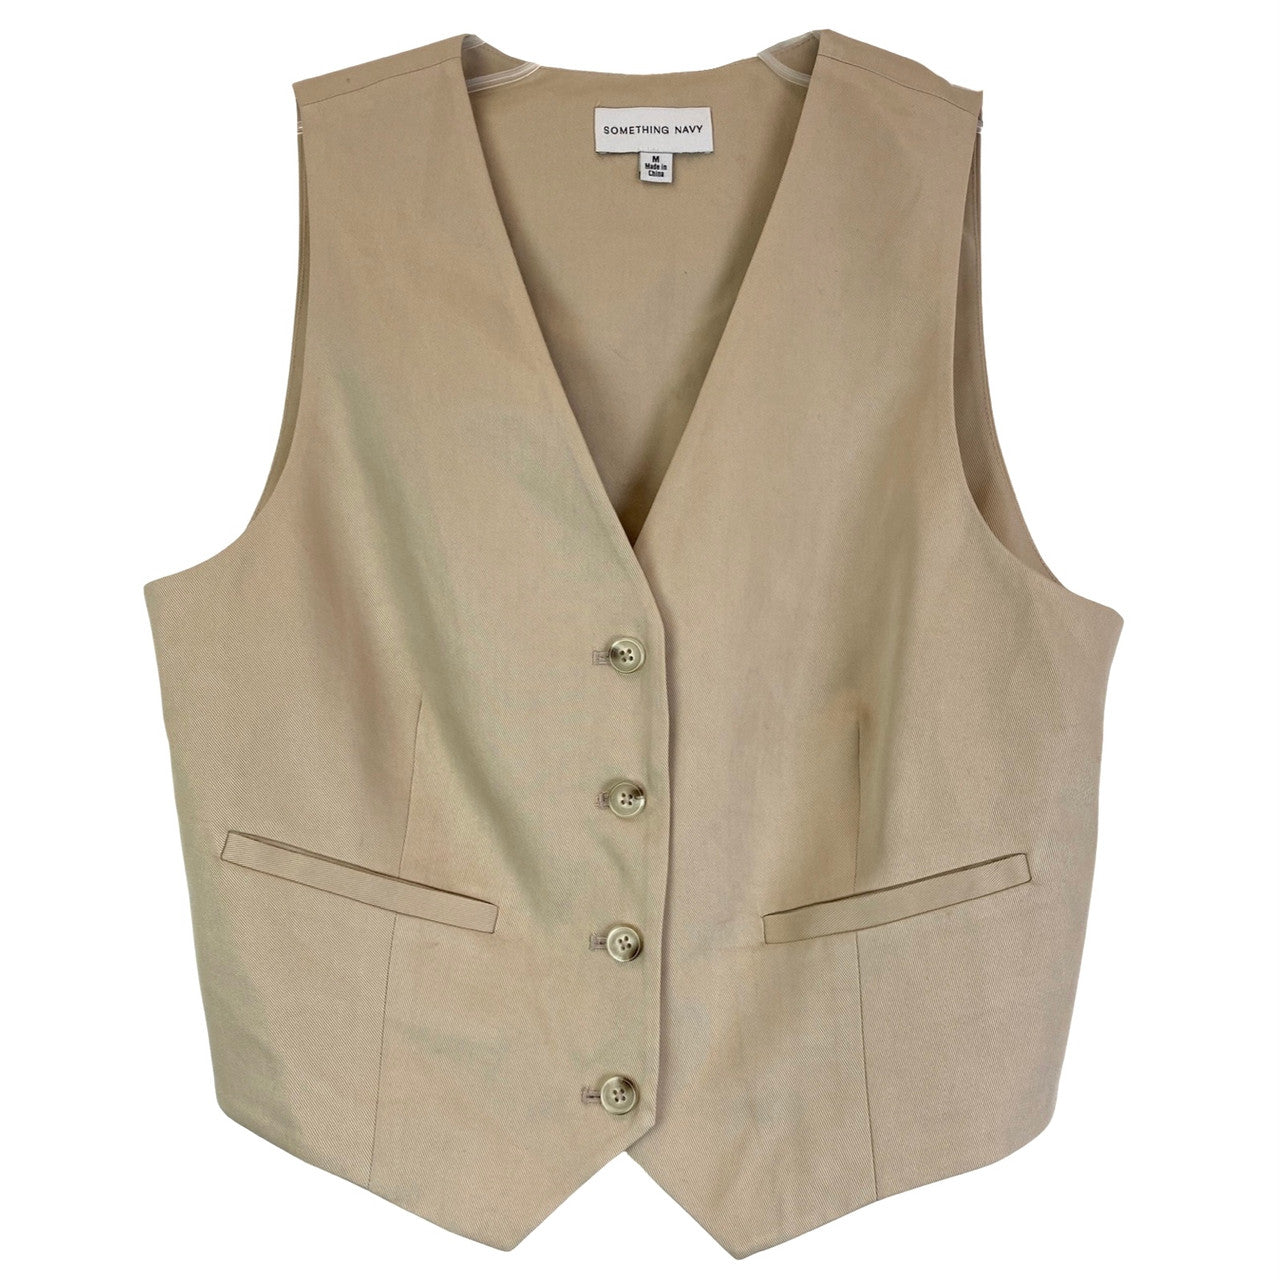 Something Navy Tailored Vest-Front